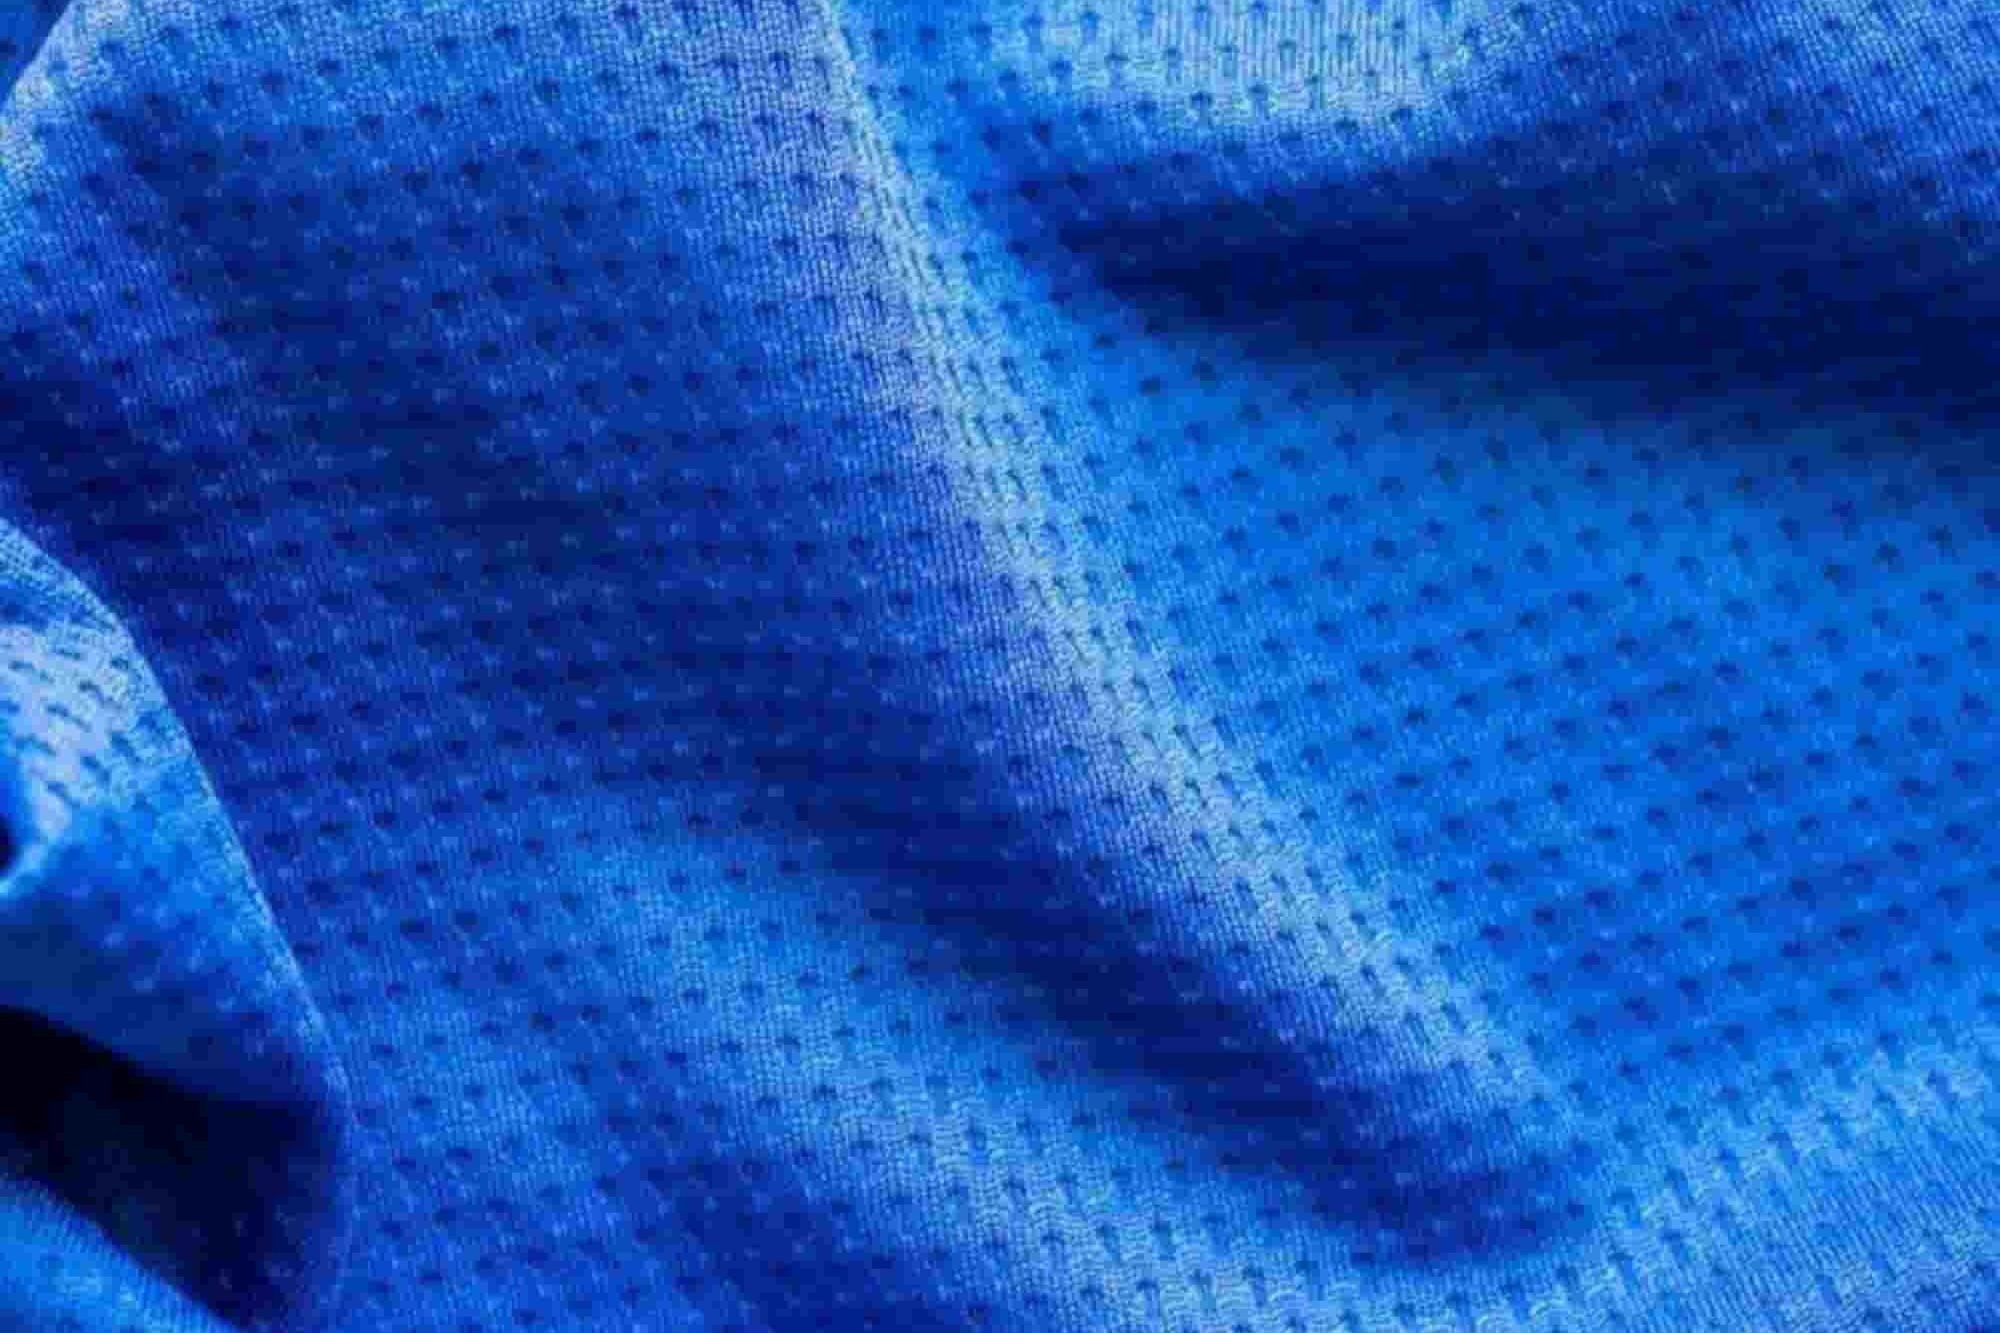 3D Fashion Technology Blog, Woven and Knit Fabrics: The Key Differences  Between Knit and Woven Fabrics for Clothing Design